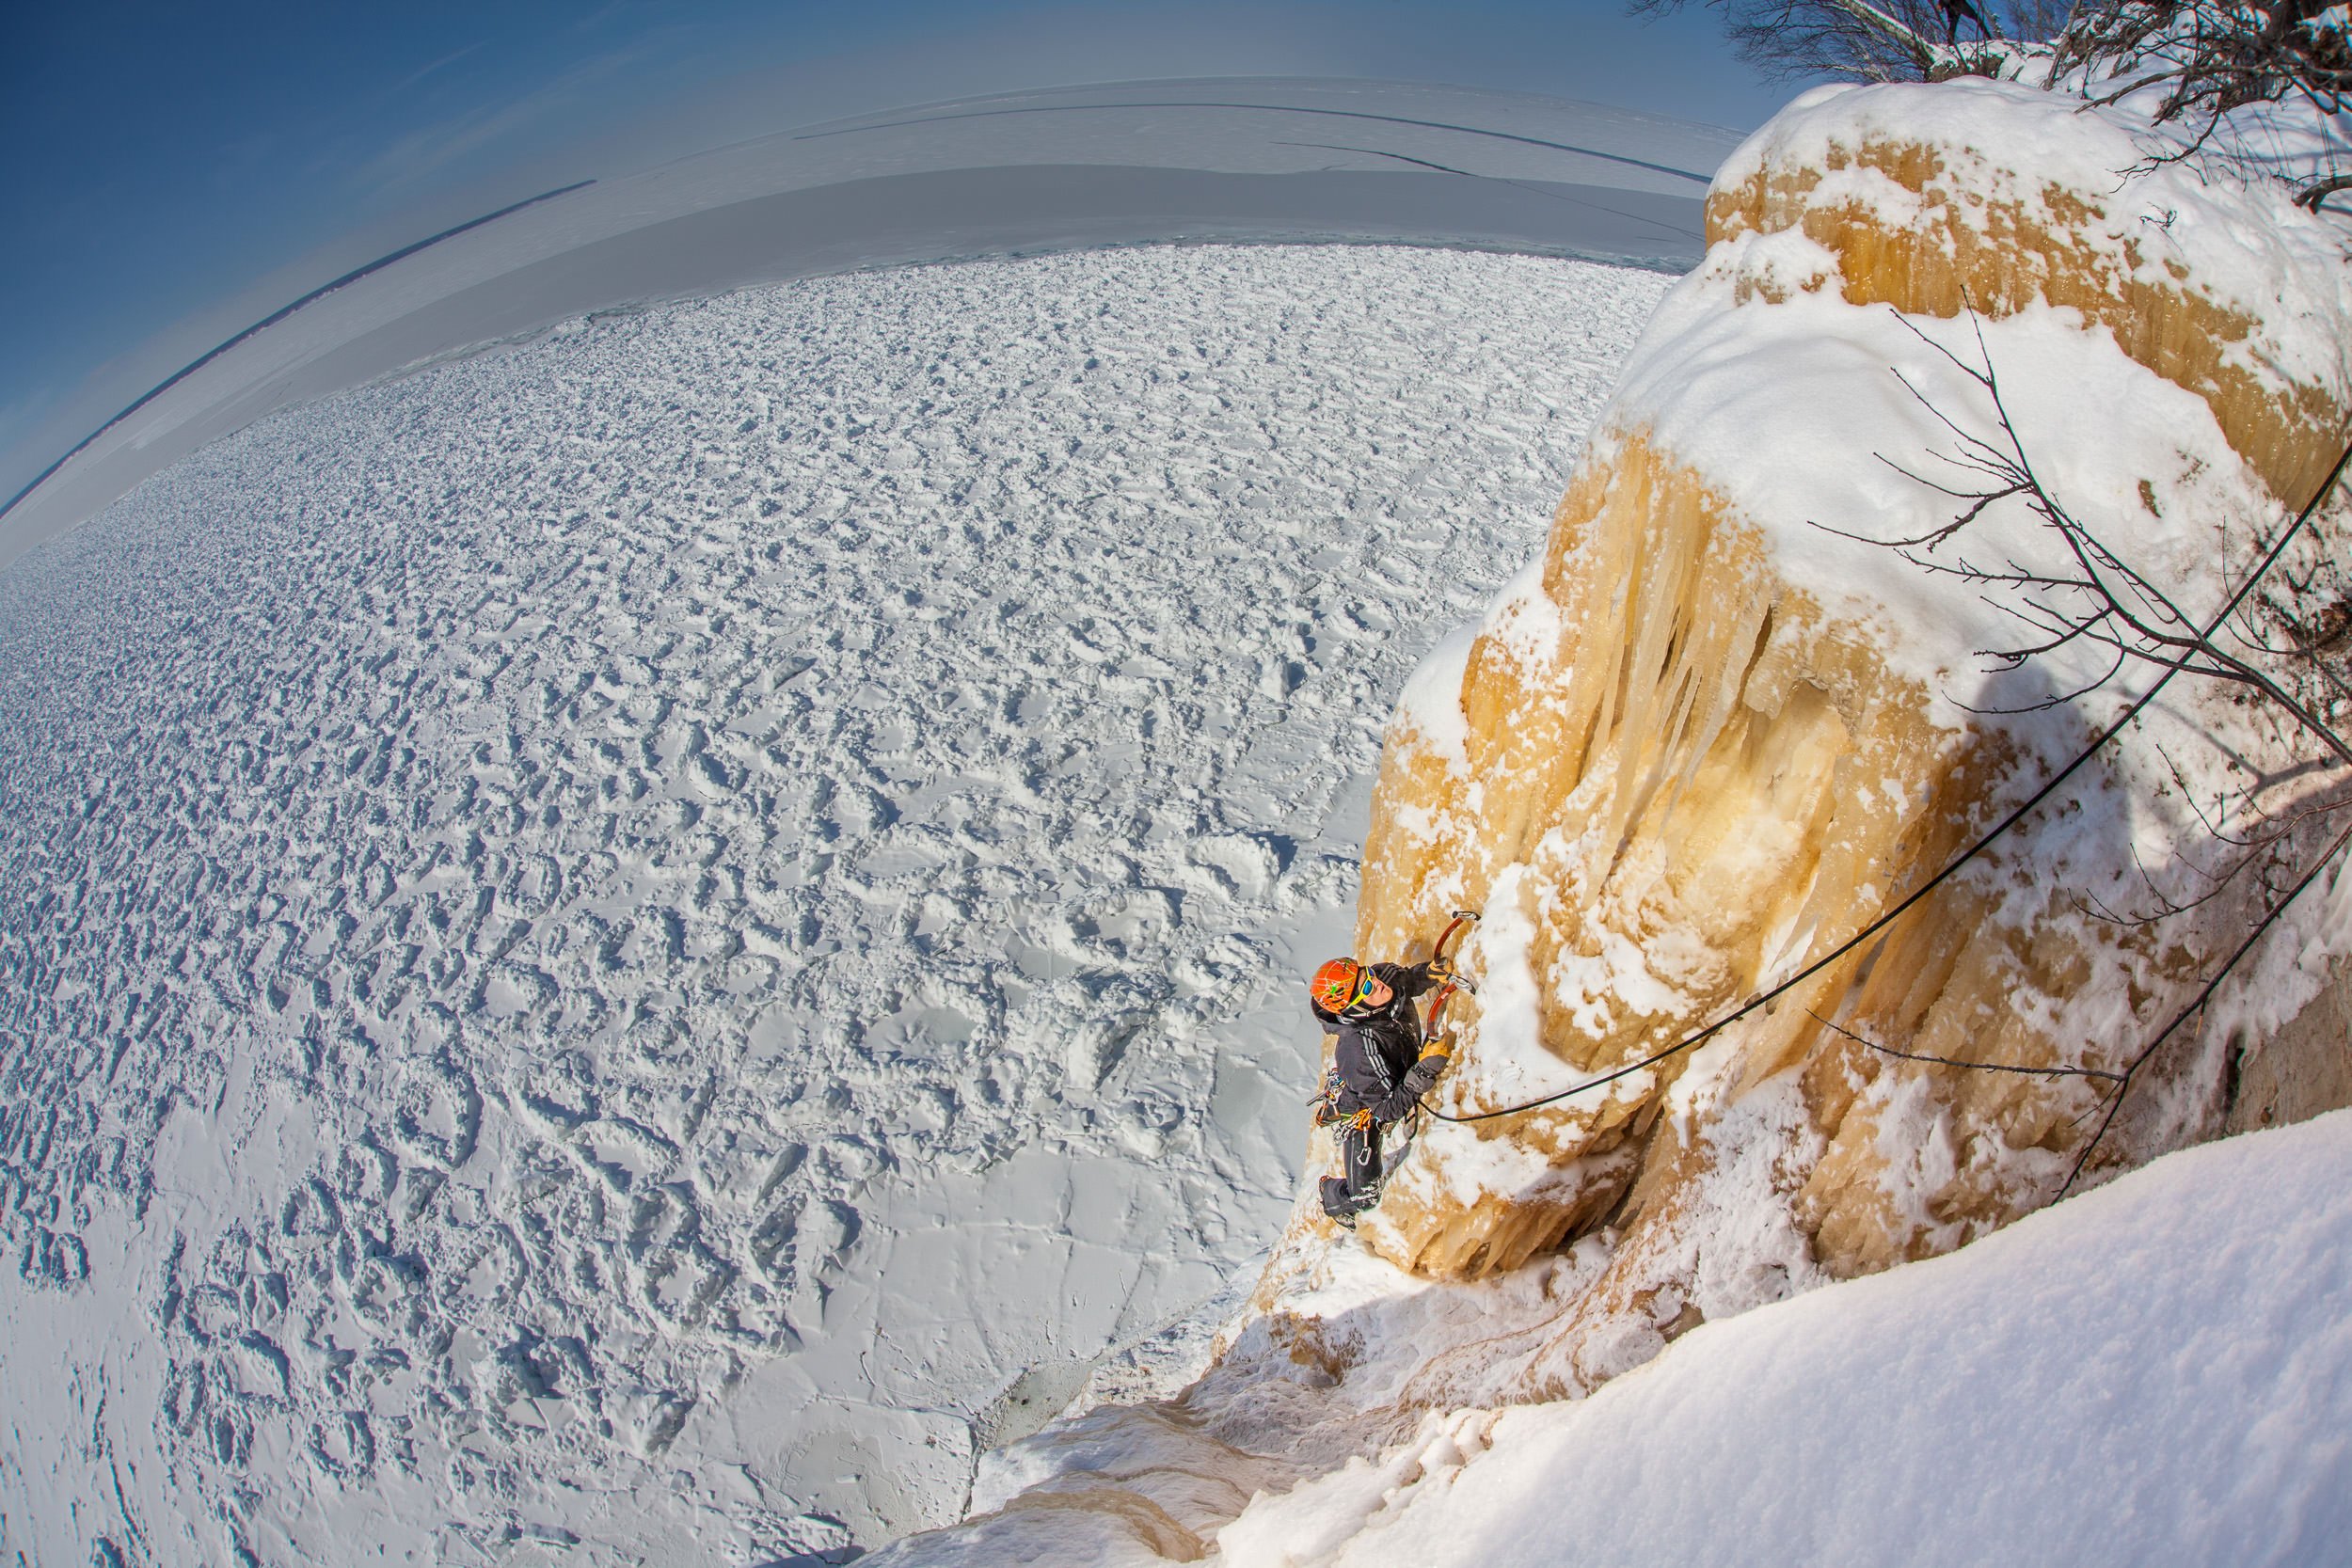  Ben Erdmann following on Twin Towers, with snow covered pancake ice below him. 